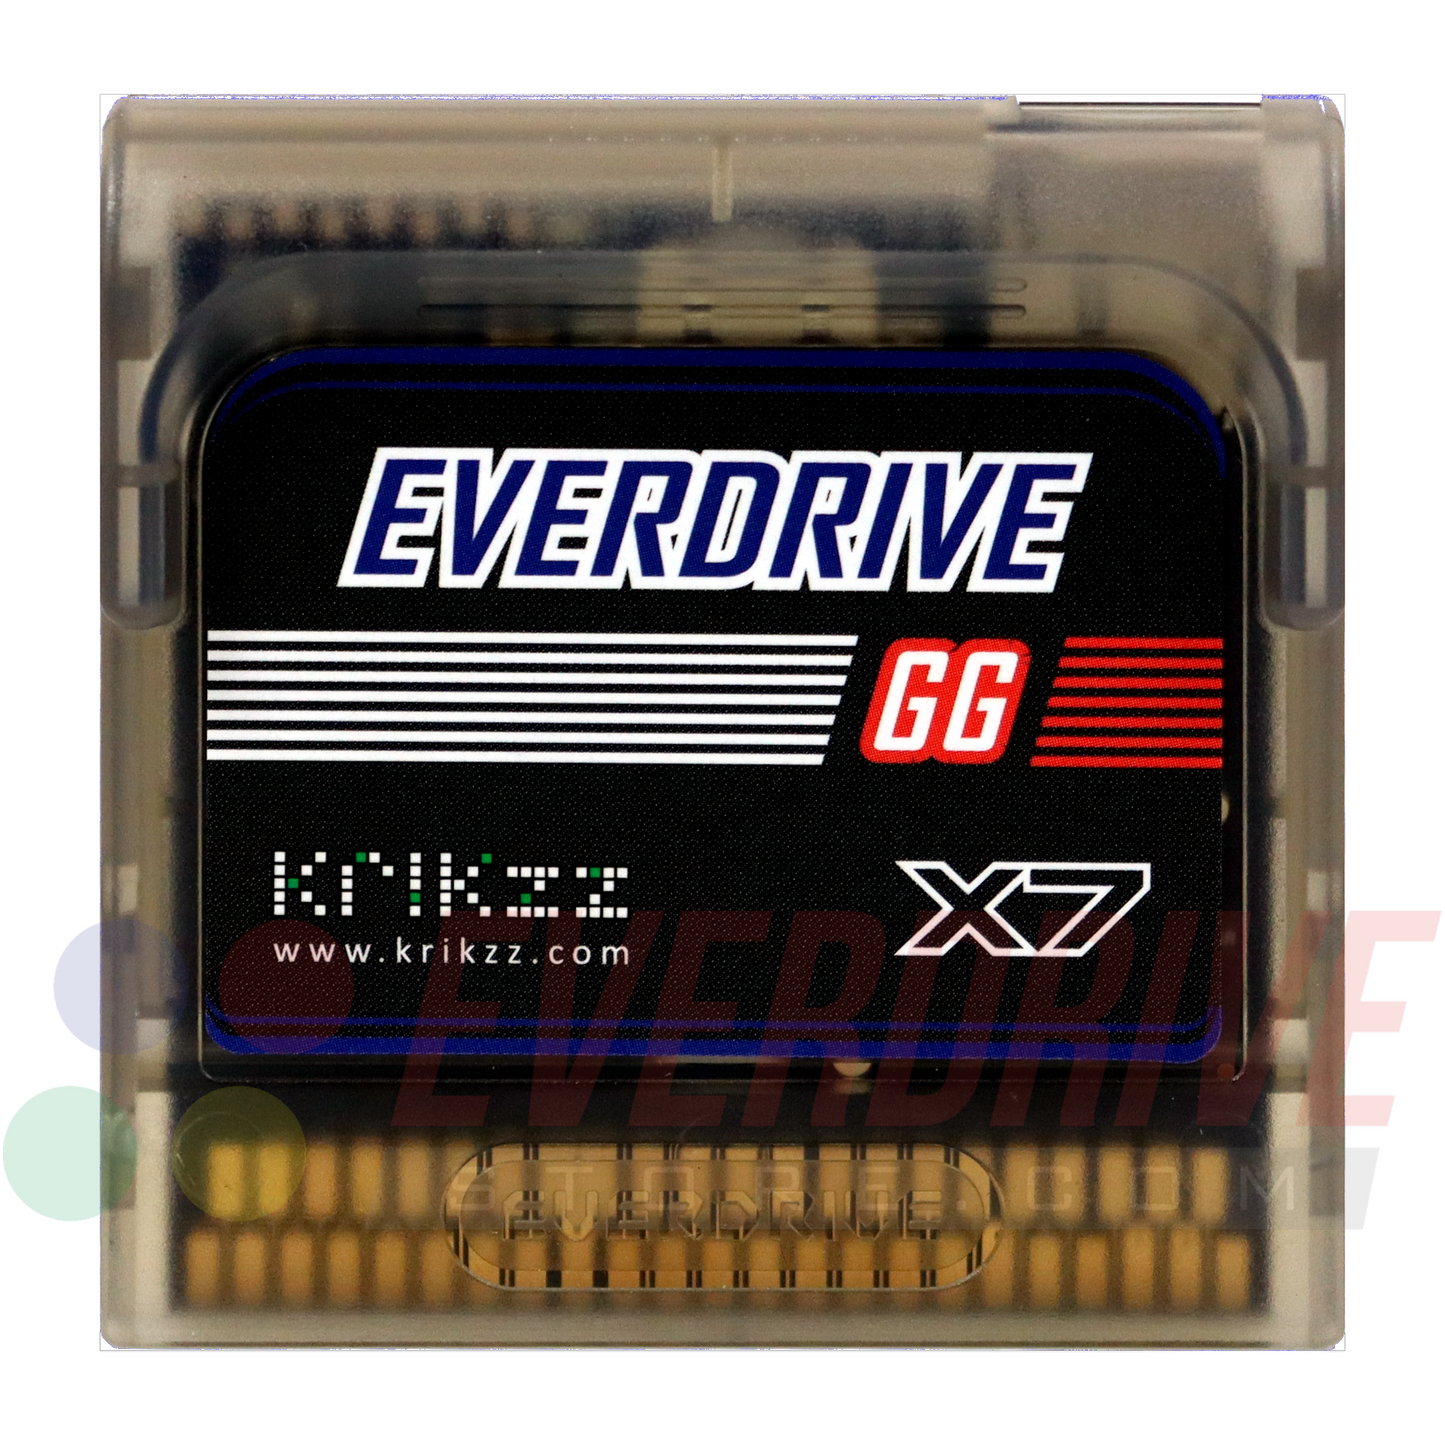 Everdrive GG X7 - Frosted Black